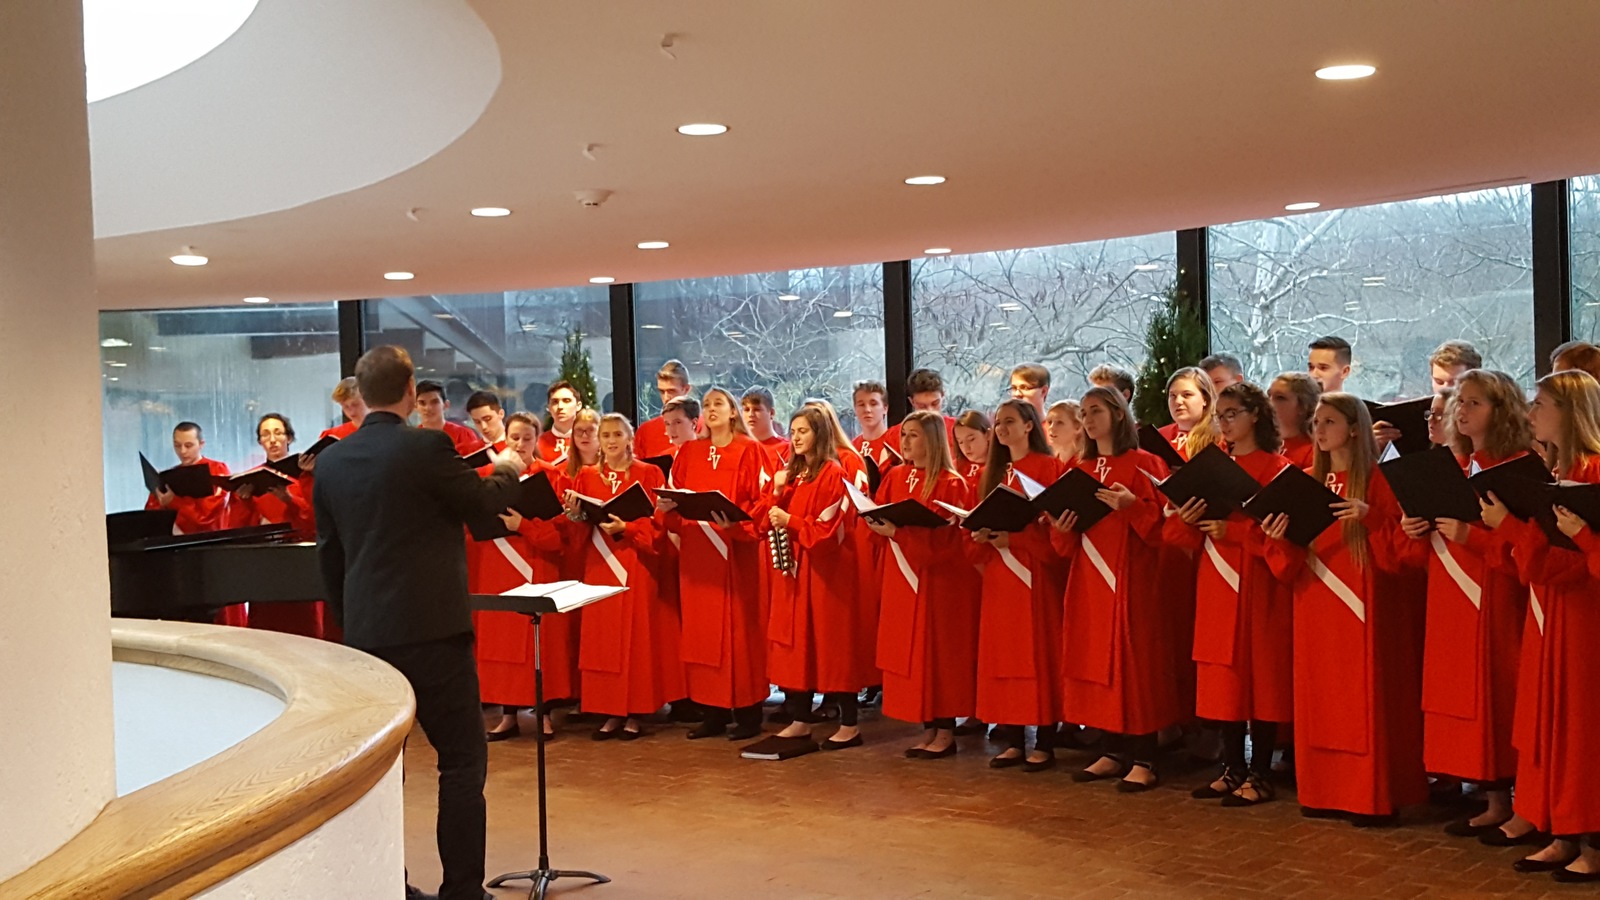 School choir wearing red choir robes, arranged in a half circle formation in the Museum's atrium